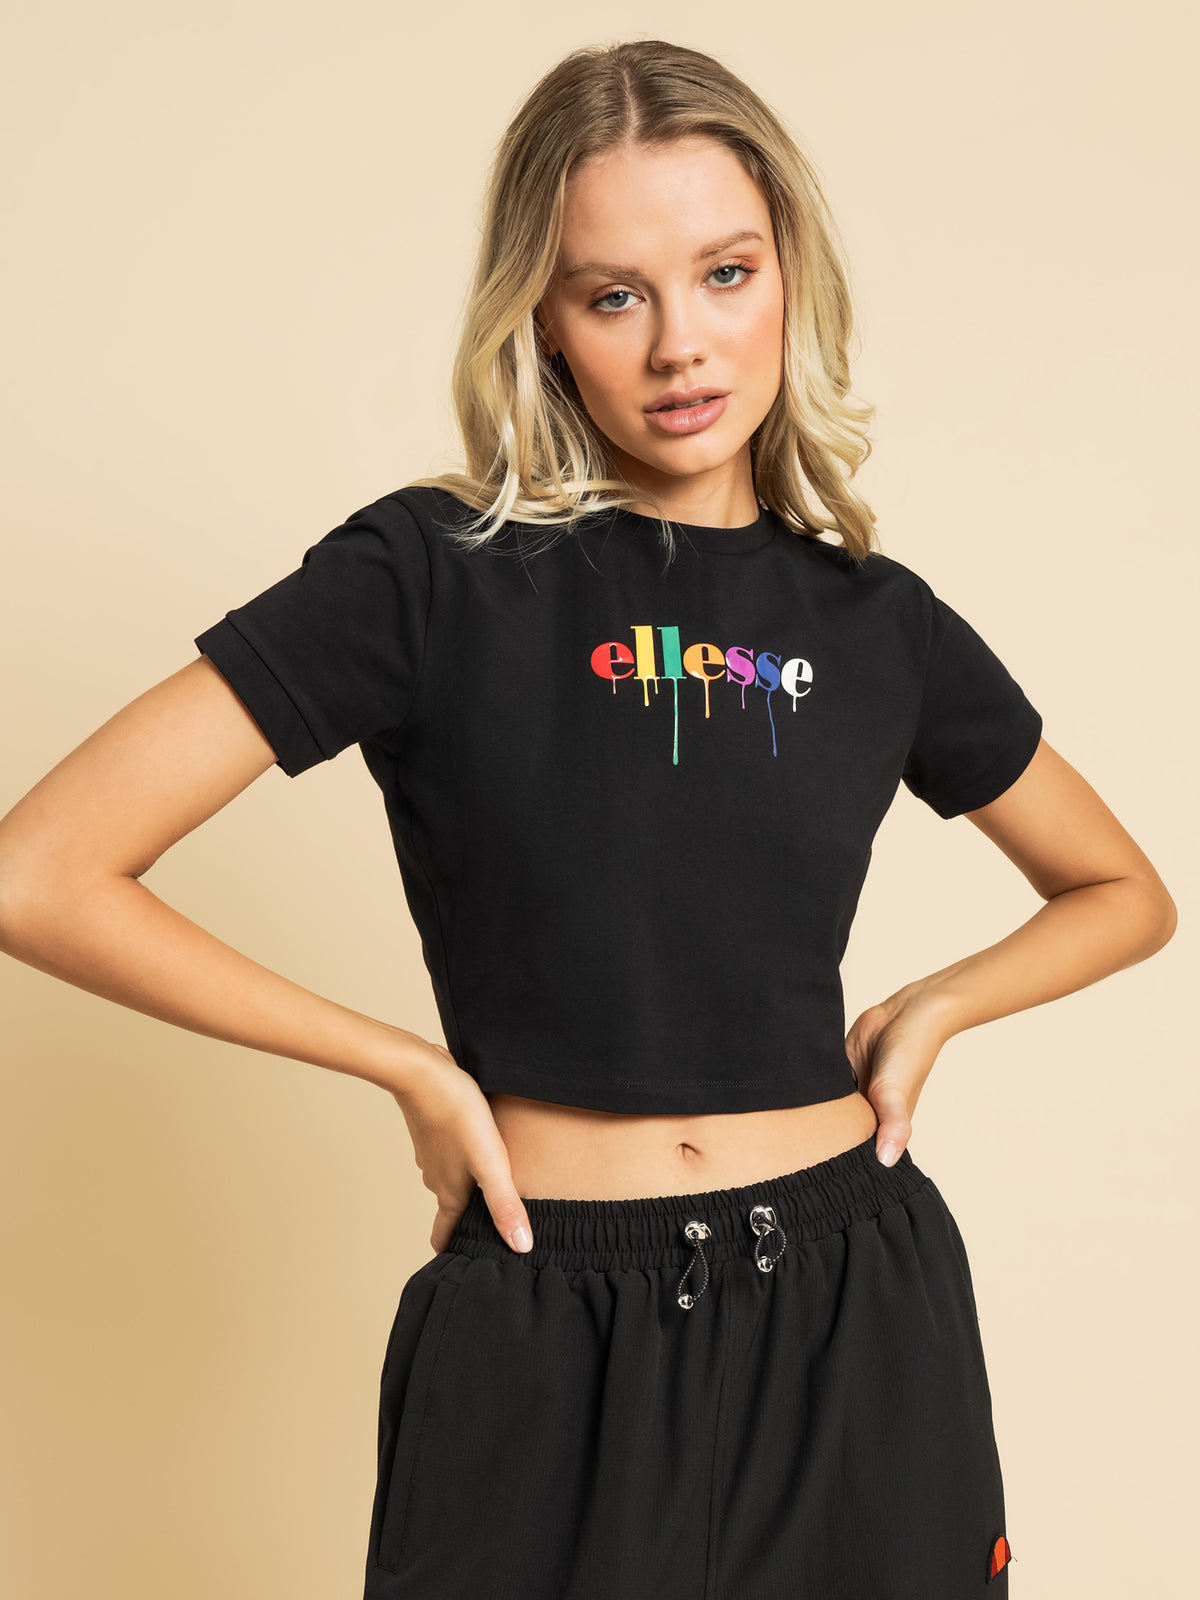 Romanica Cropped T-Shirt in Black